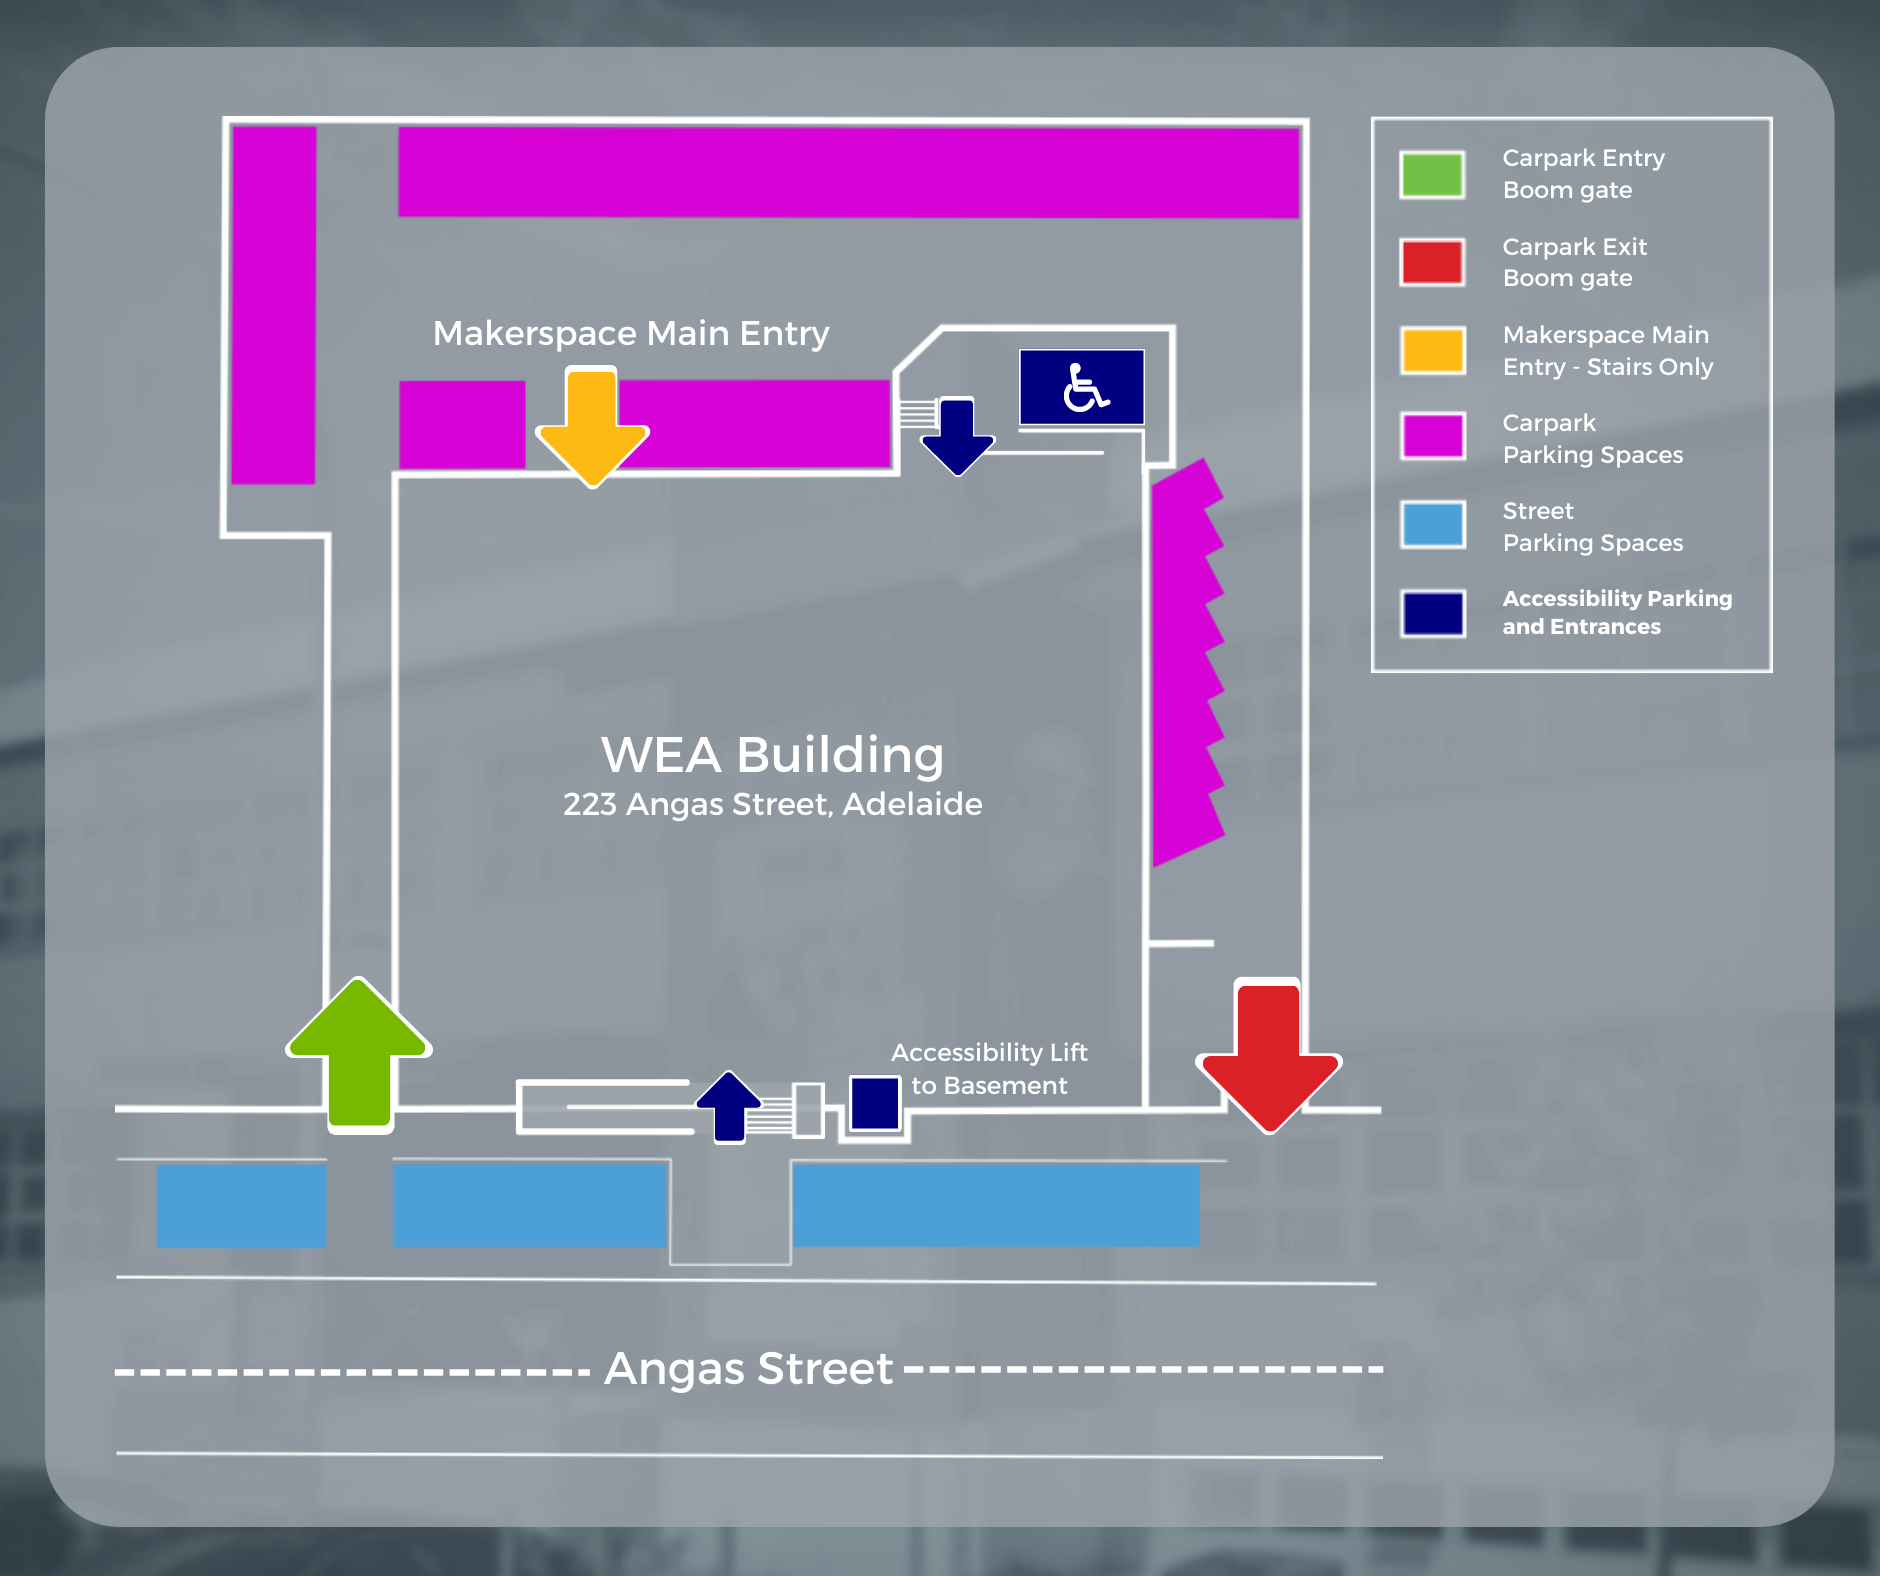 Makerspace Adelaide Entry & Parking Map